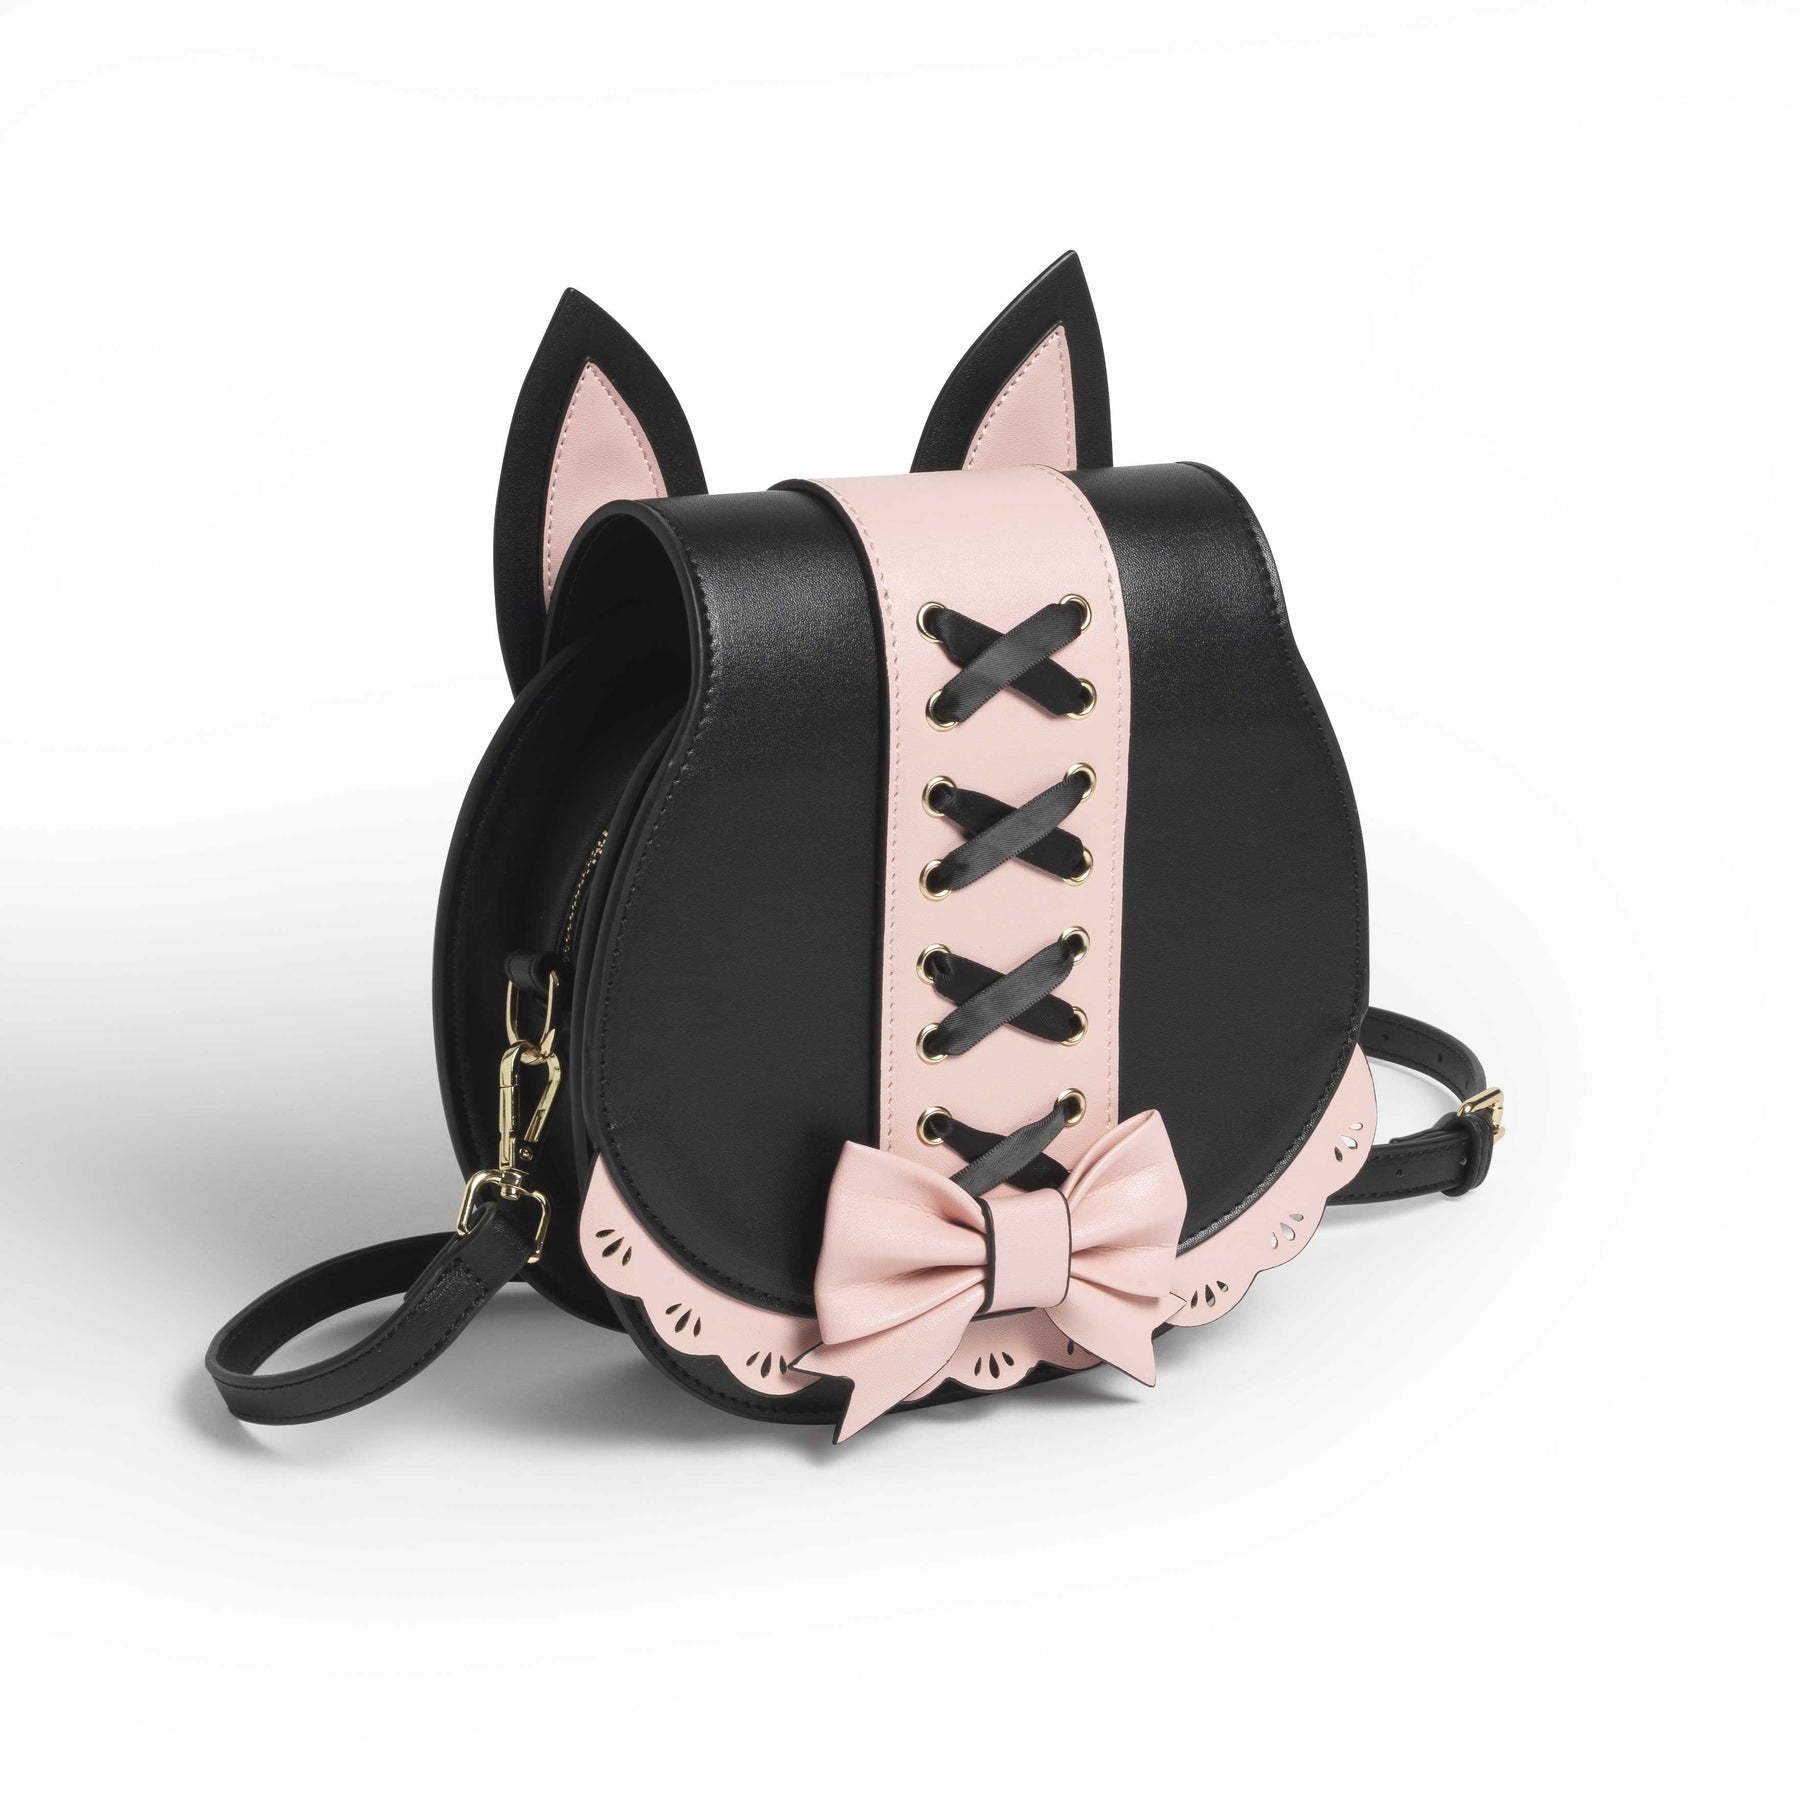 4 Types of Bags and Purses That Every Cat Lover Should Own